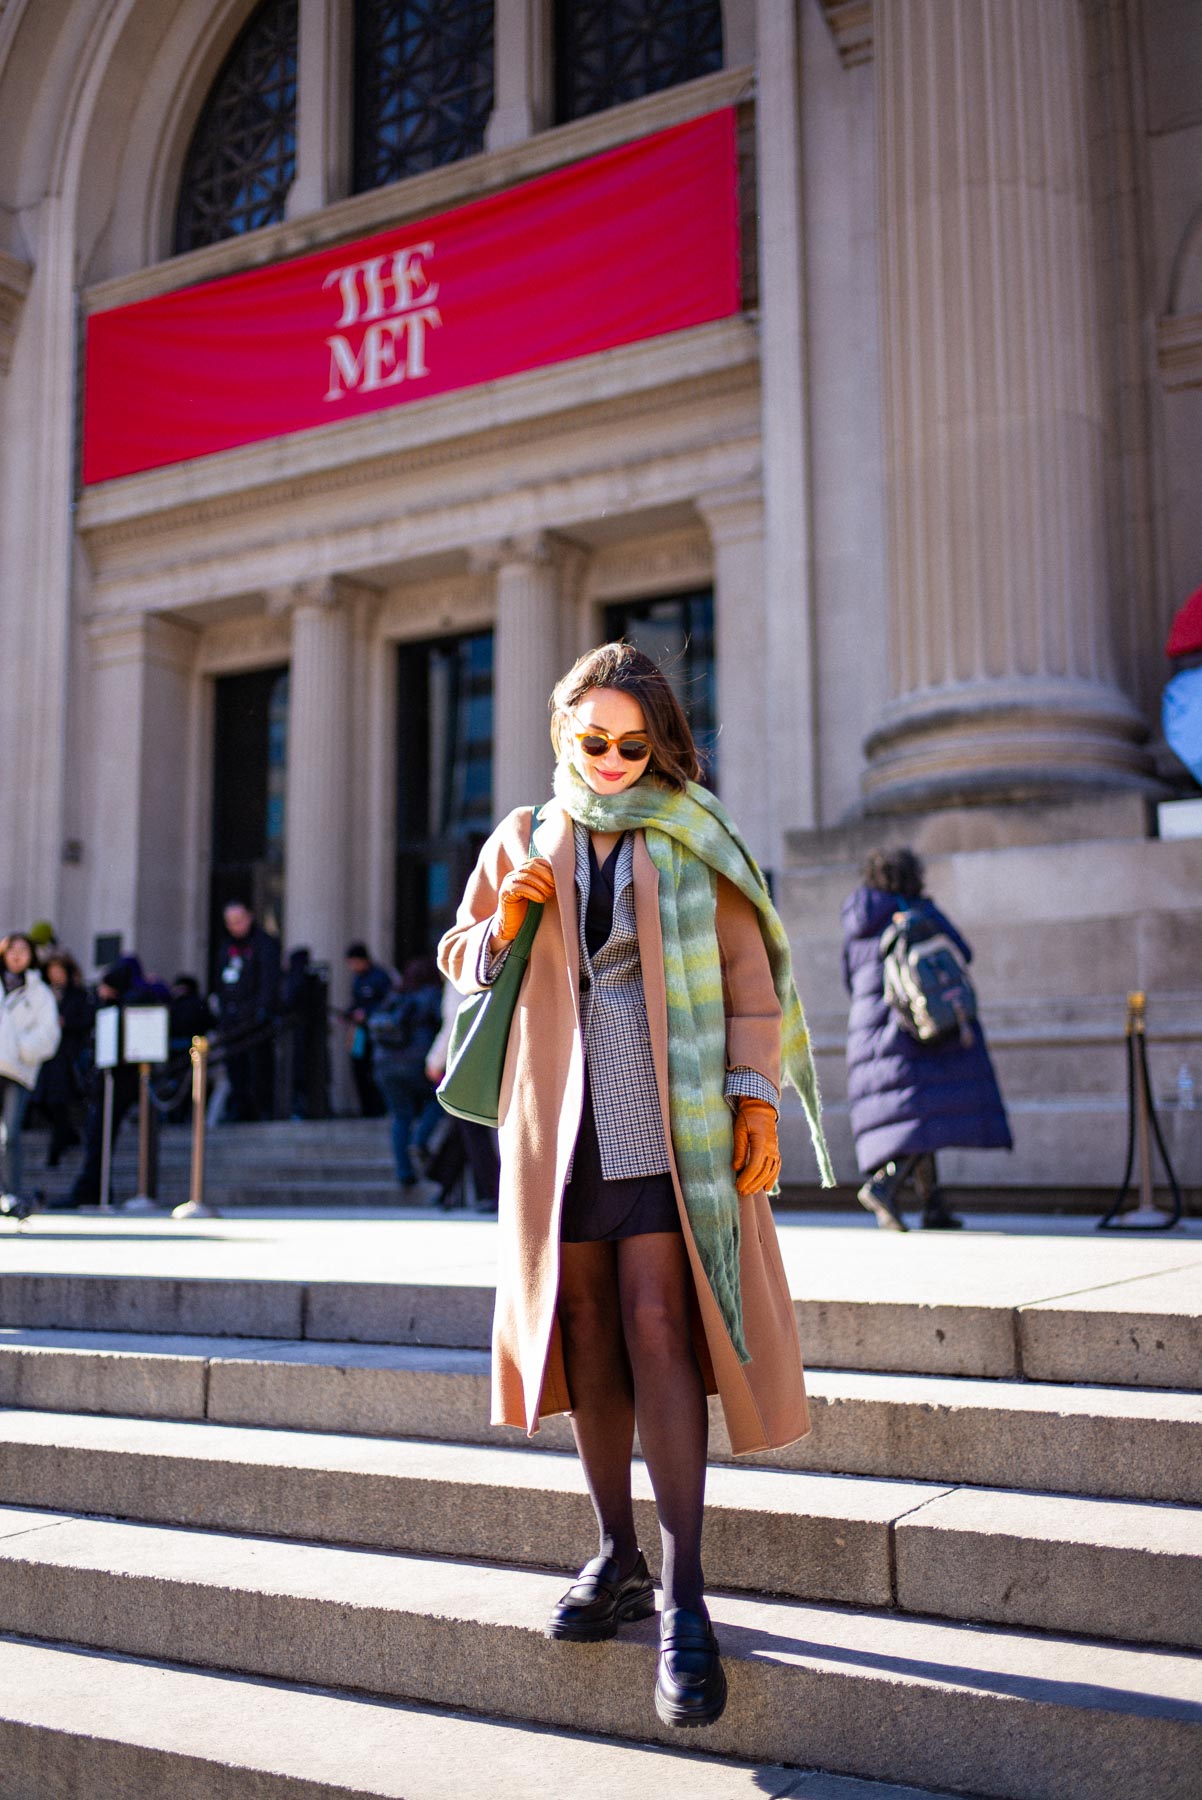 What to wear to The Met Museum in NYC